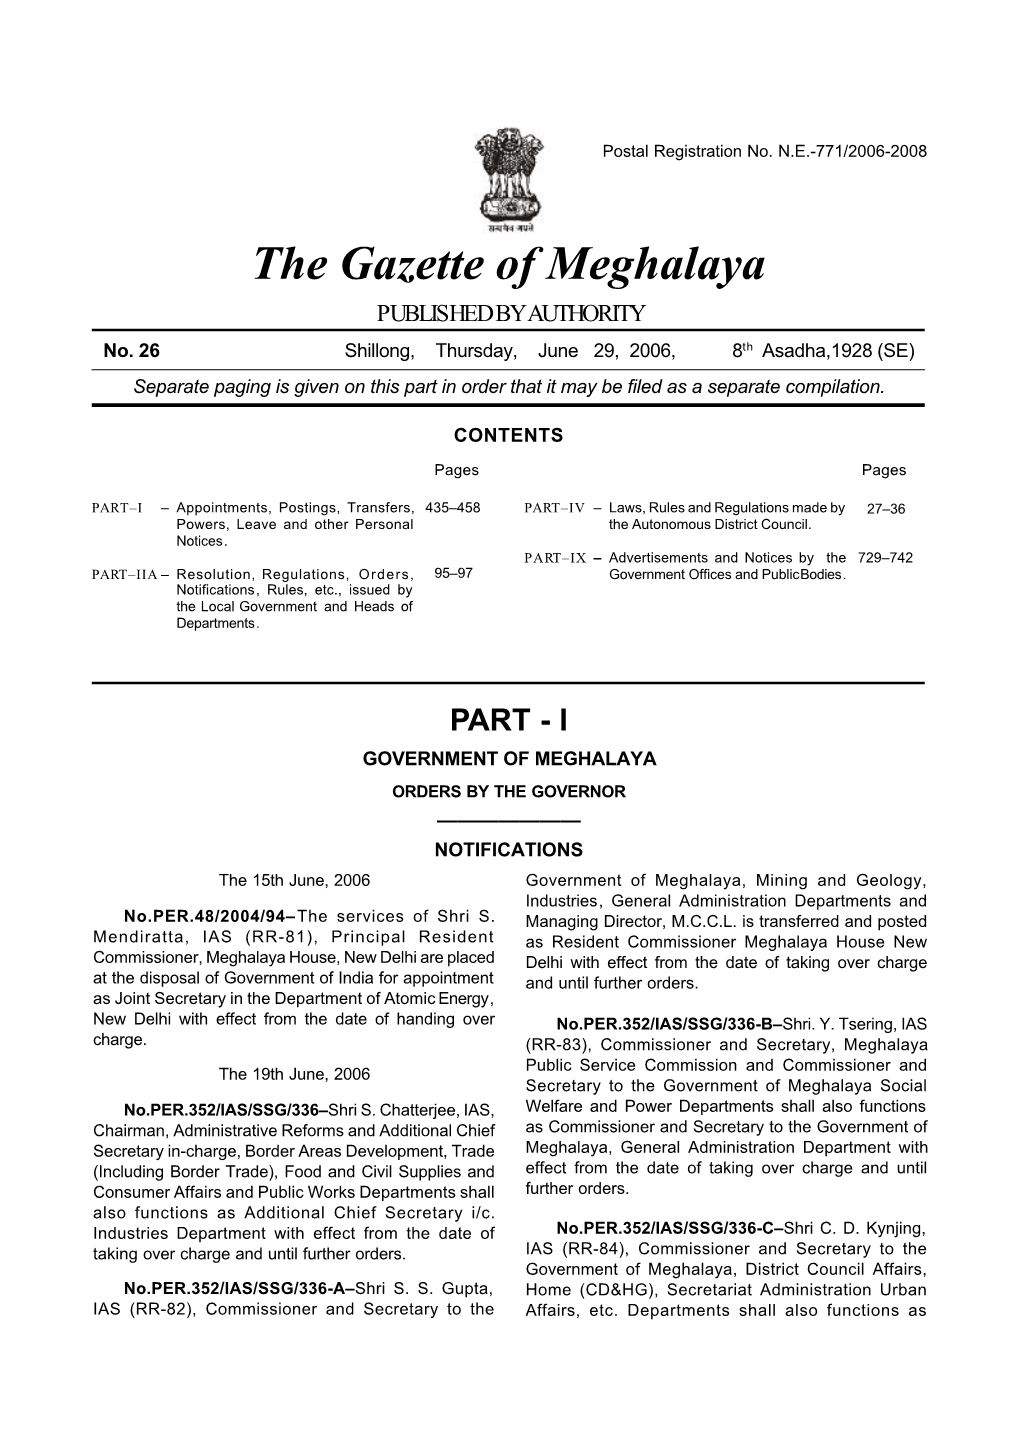 The Gazette of Meghalaya PUBLISHED by AUTHORITY No